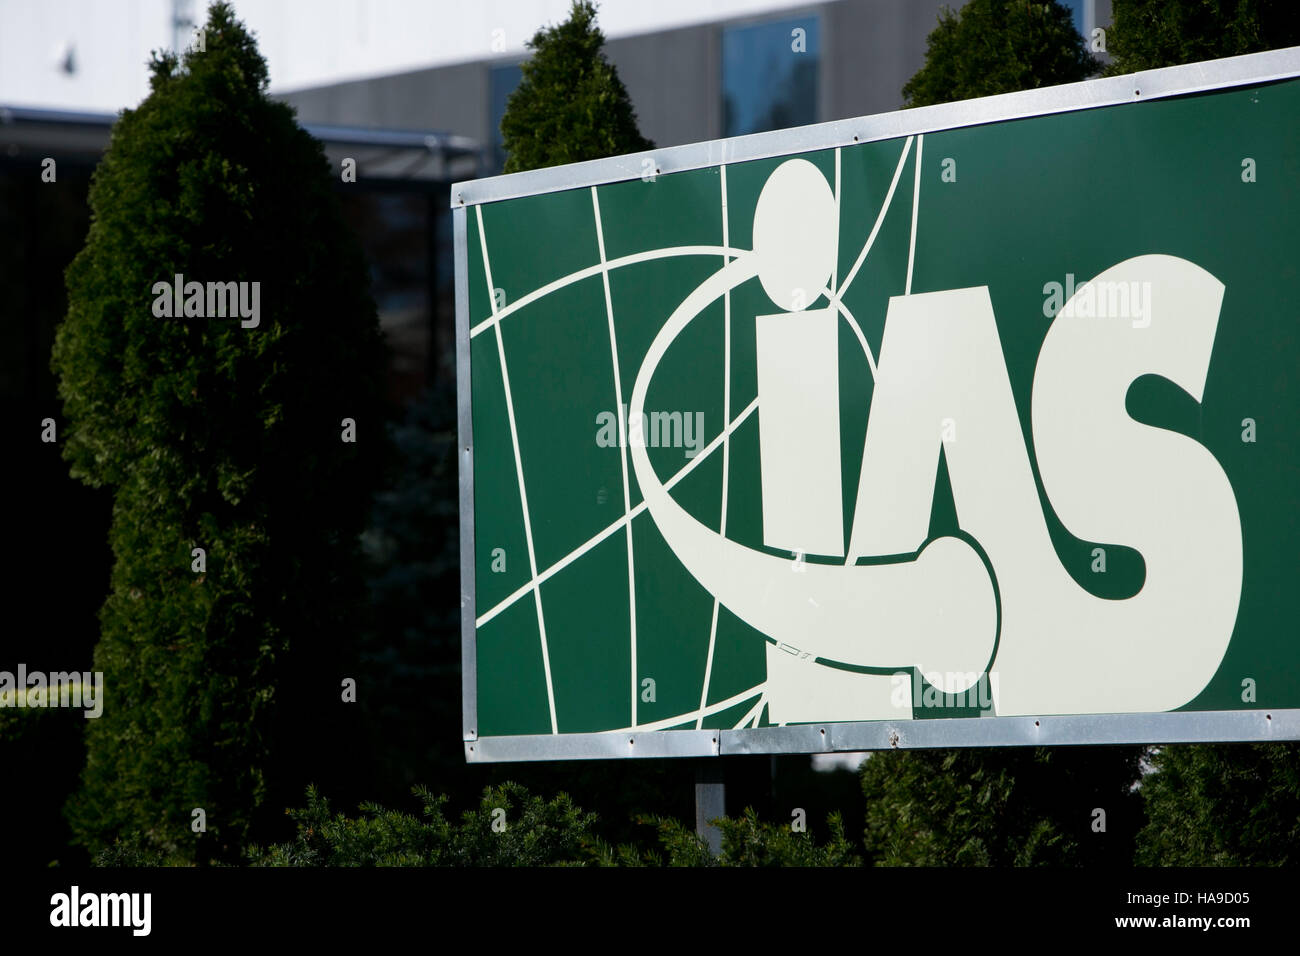 A logo sign outside of a facility occupied by International American Supermarkets Corp., in Piscataway Township, New Jersey on November 6, 2016. Stock Photo